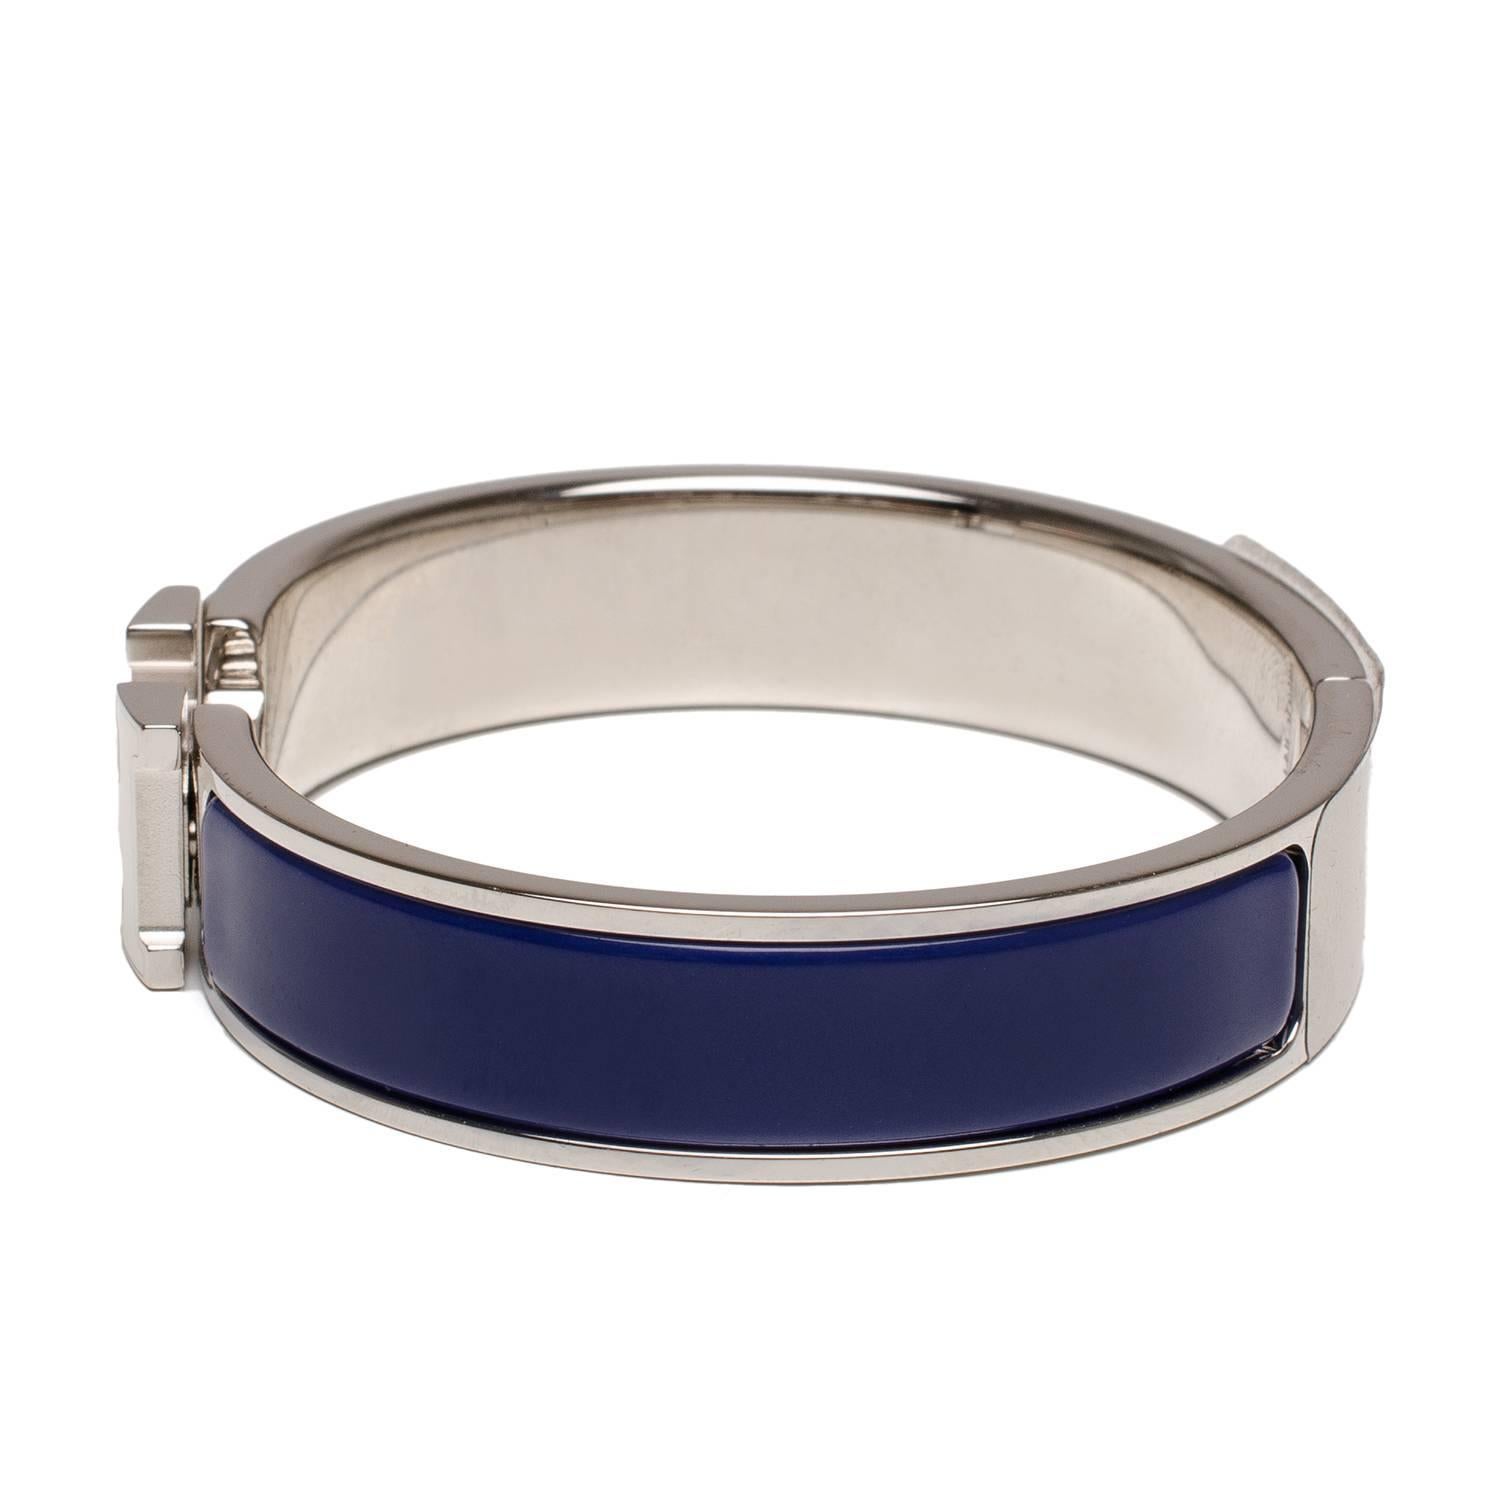 Hermes narrow Clic Clac H bracelet in blue enamel with a white enamel H closure and palladium plated hardware in size PM.

Origin: France

Condition: Pristine

Accompanied by: Hermes box, Hermes dustbag, Ribbon

Measurements: Diameter: